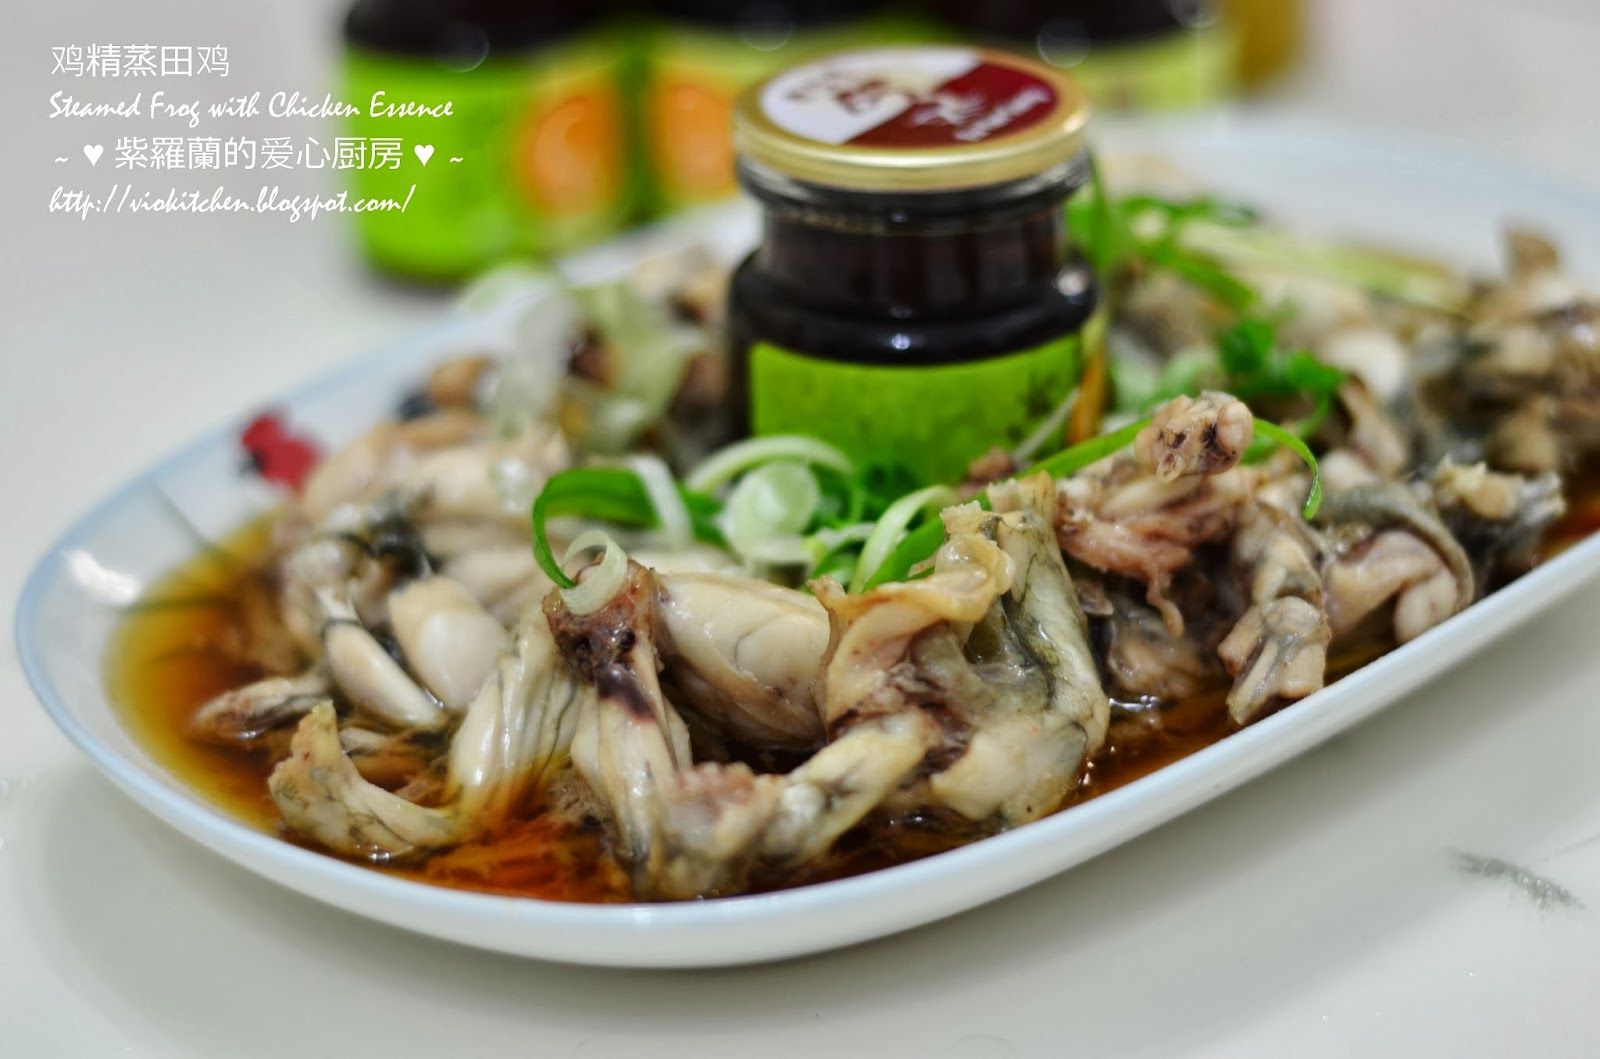 Violet's Kitchen ~♥紫羅蘭的爱心厨房♥~ : 鸡精蒸田鸡 Steamed Frog with Chicken Essence